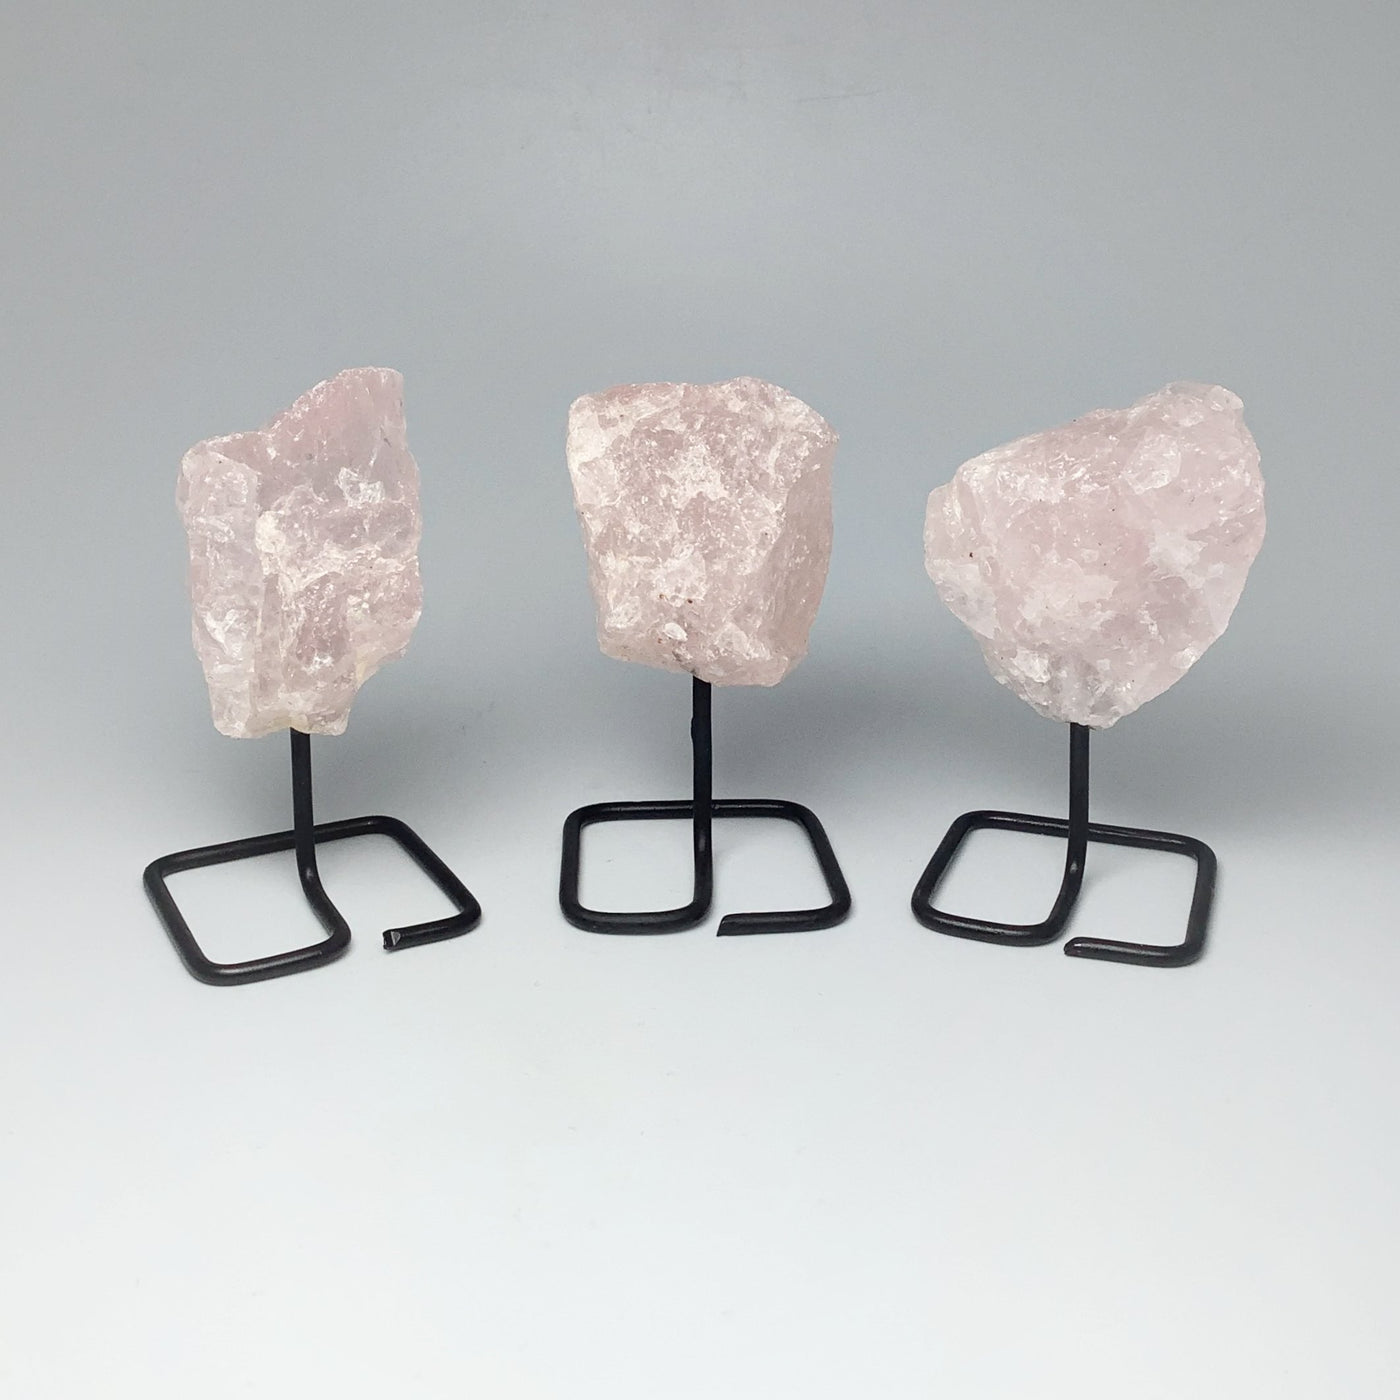 Rough Rose Quartz on Stand at $25 Each